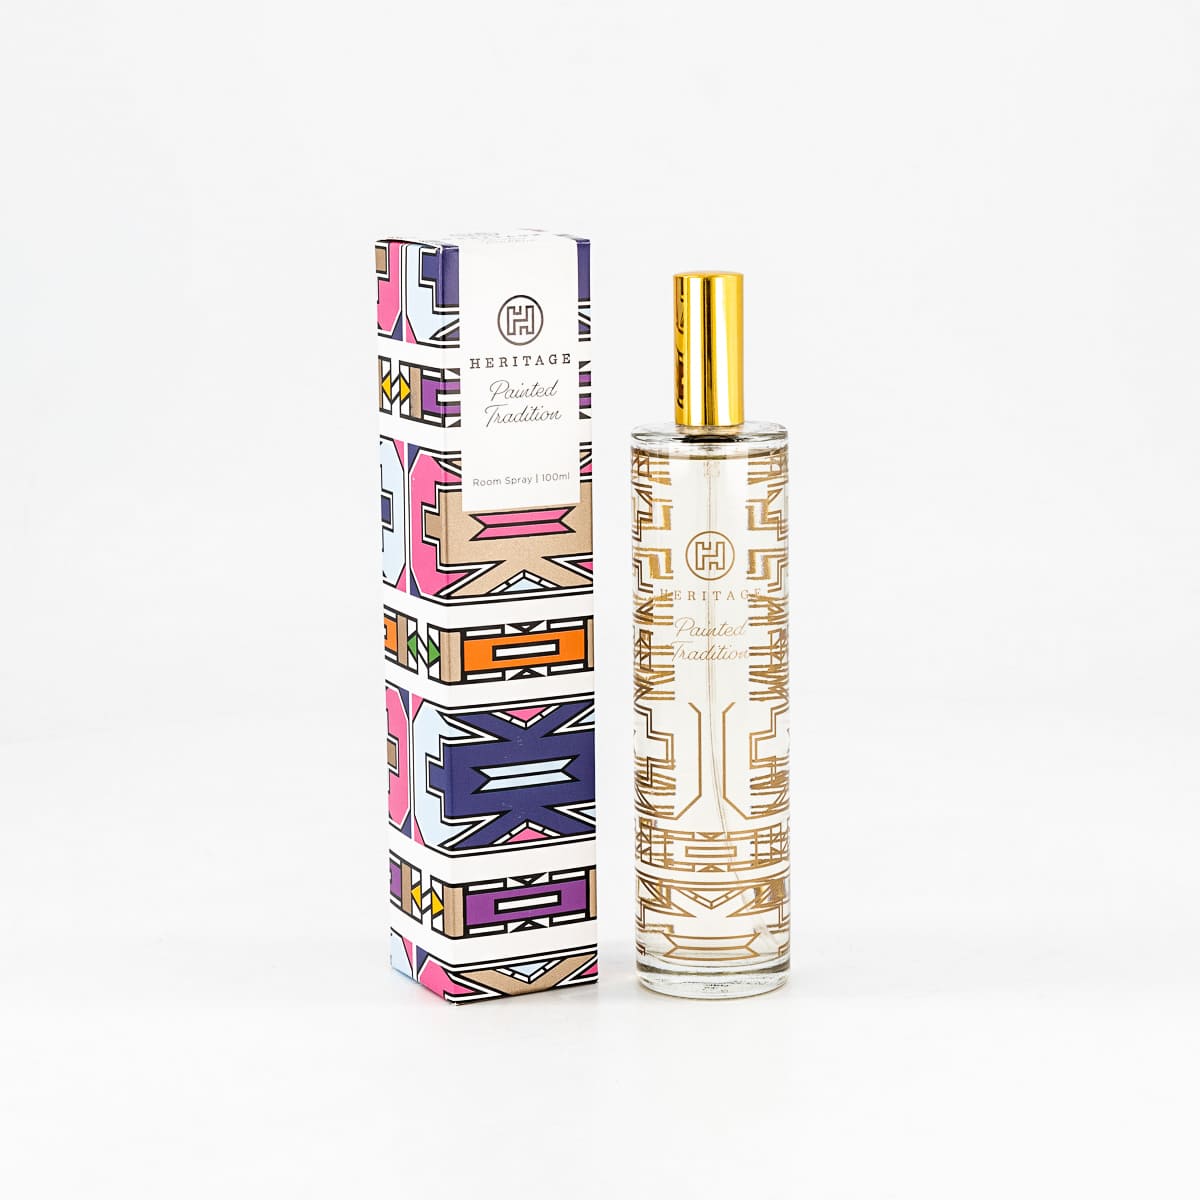 100ml Heritage Room Spray in the fragrance Painted Tradition with the traditional Ndebele tribe pattern boxed packaging